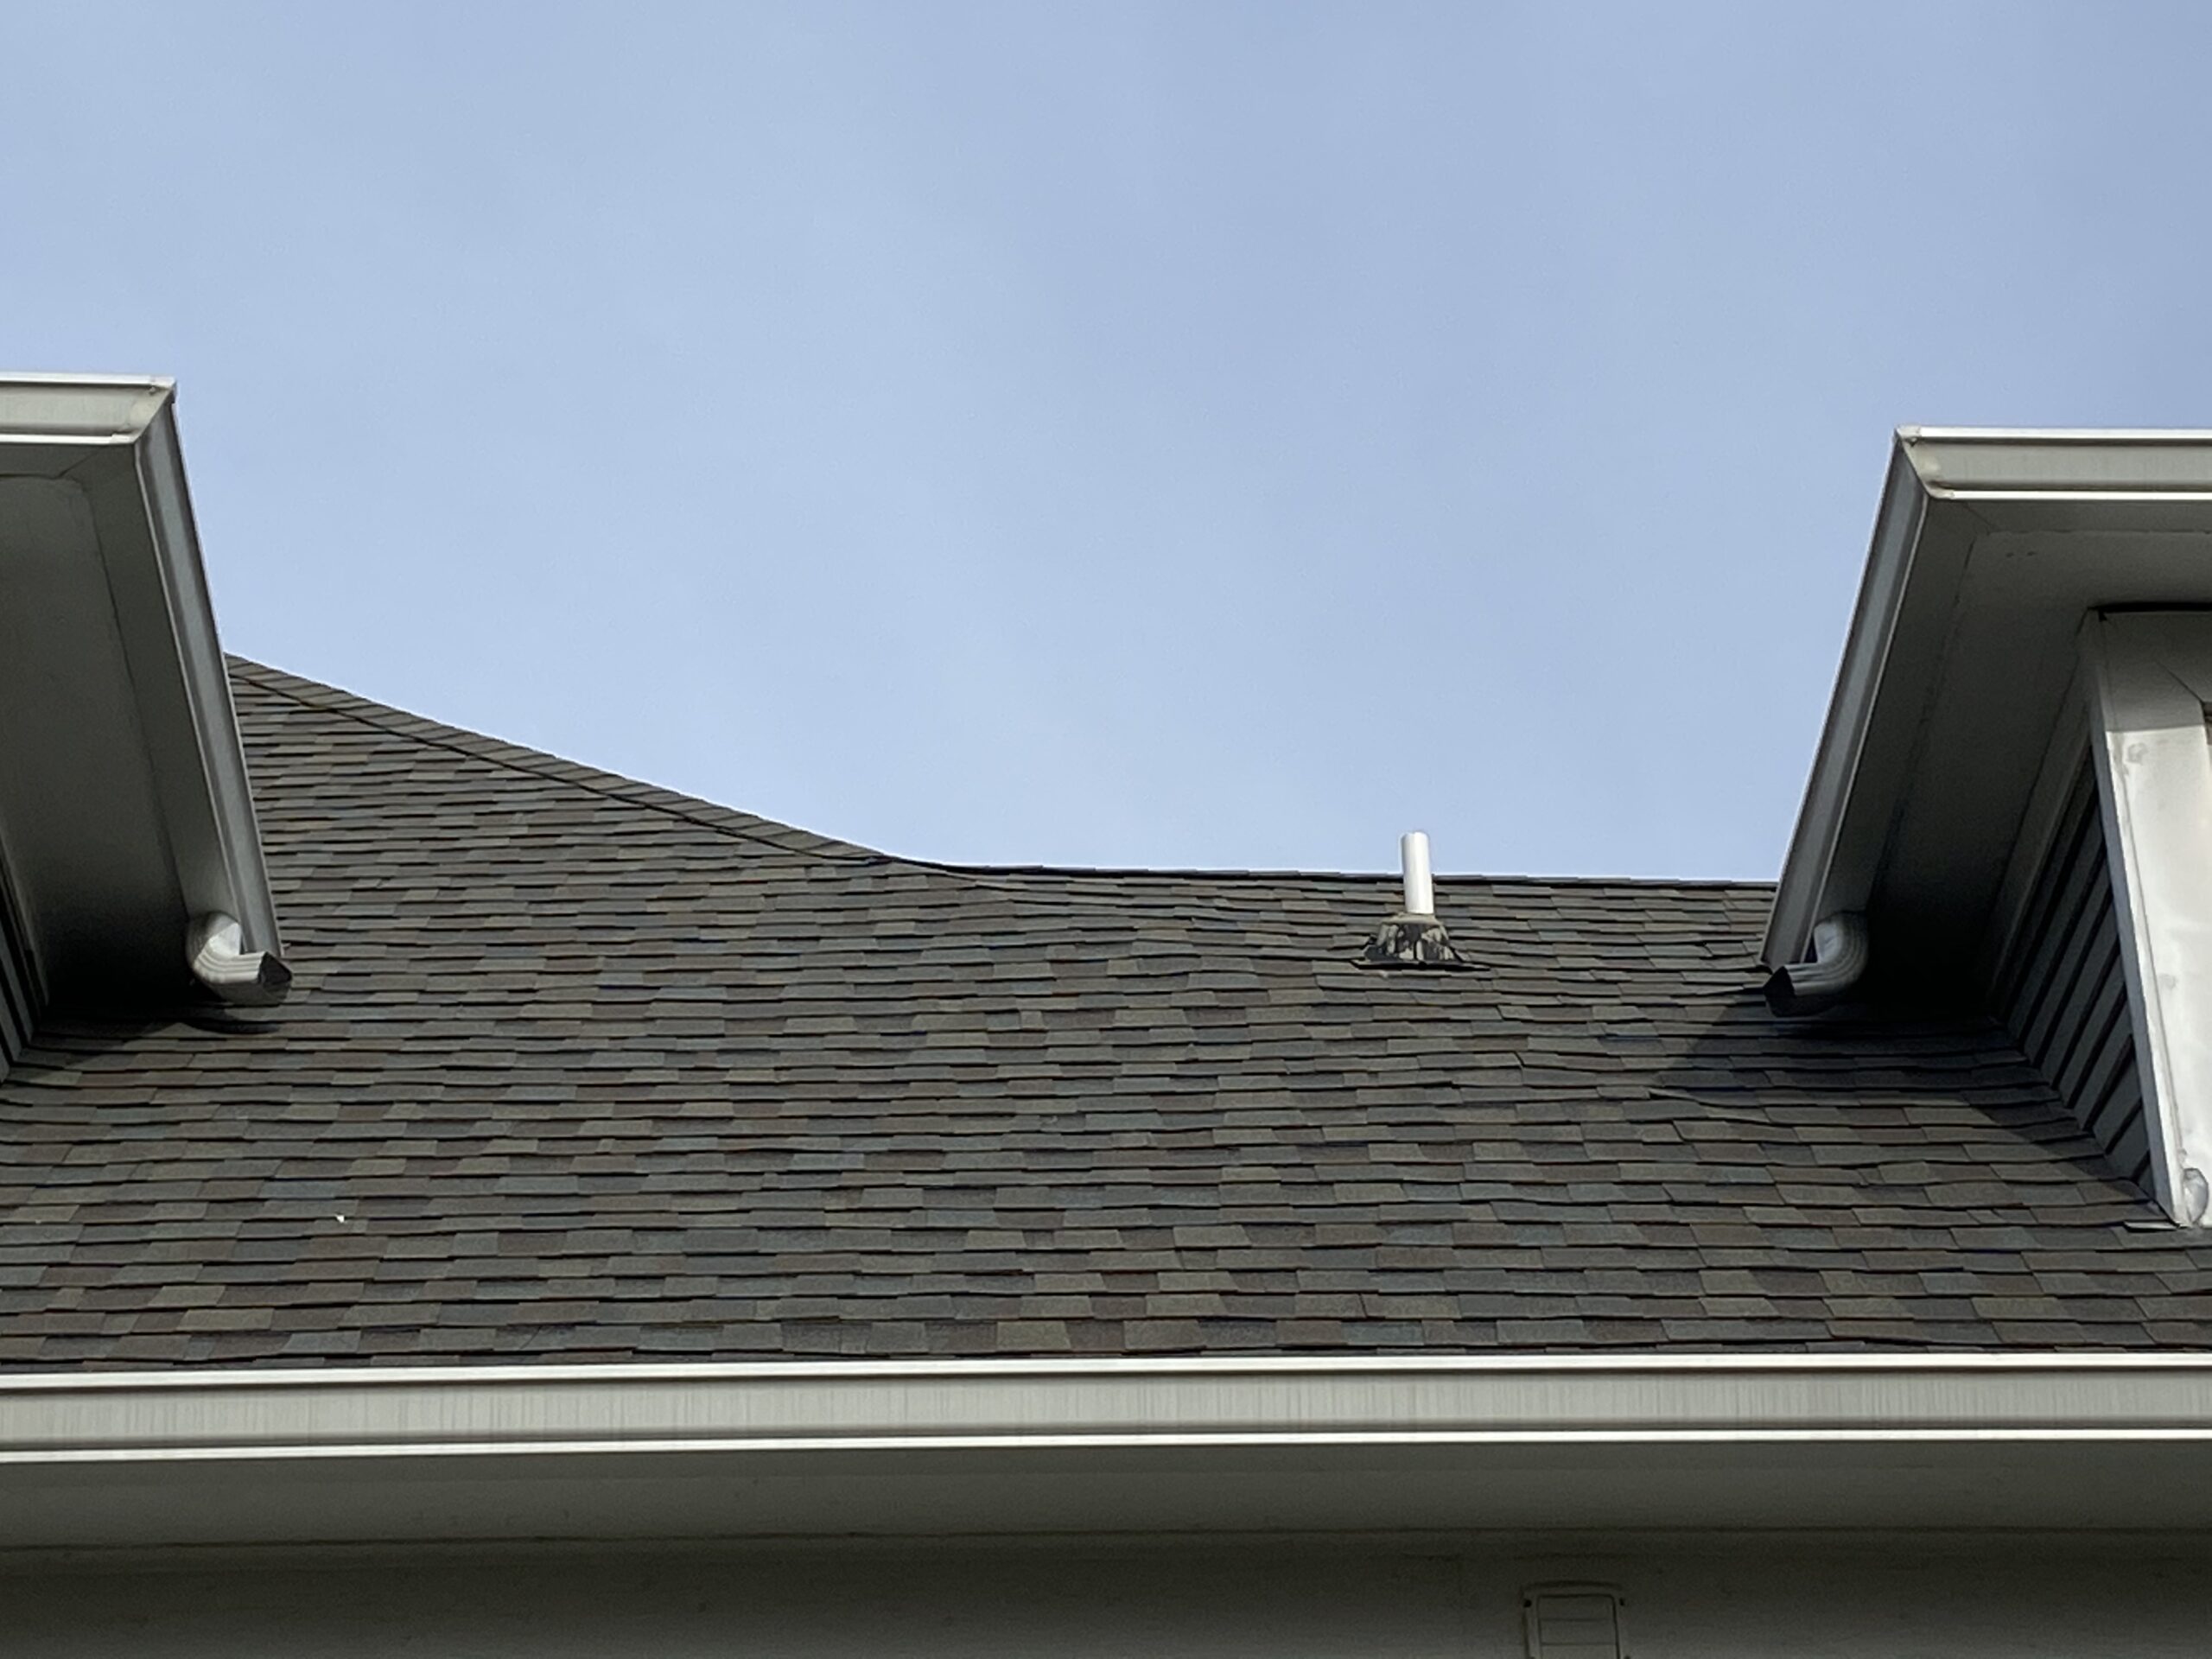 This is a picture of elbow downspouts that are pointed directly to the sides of the shingle